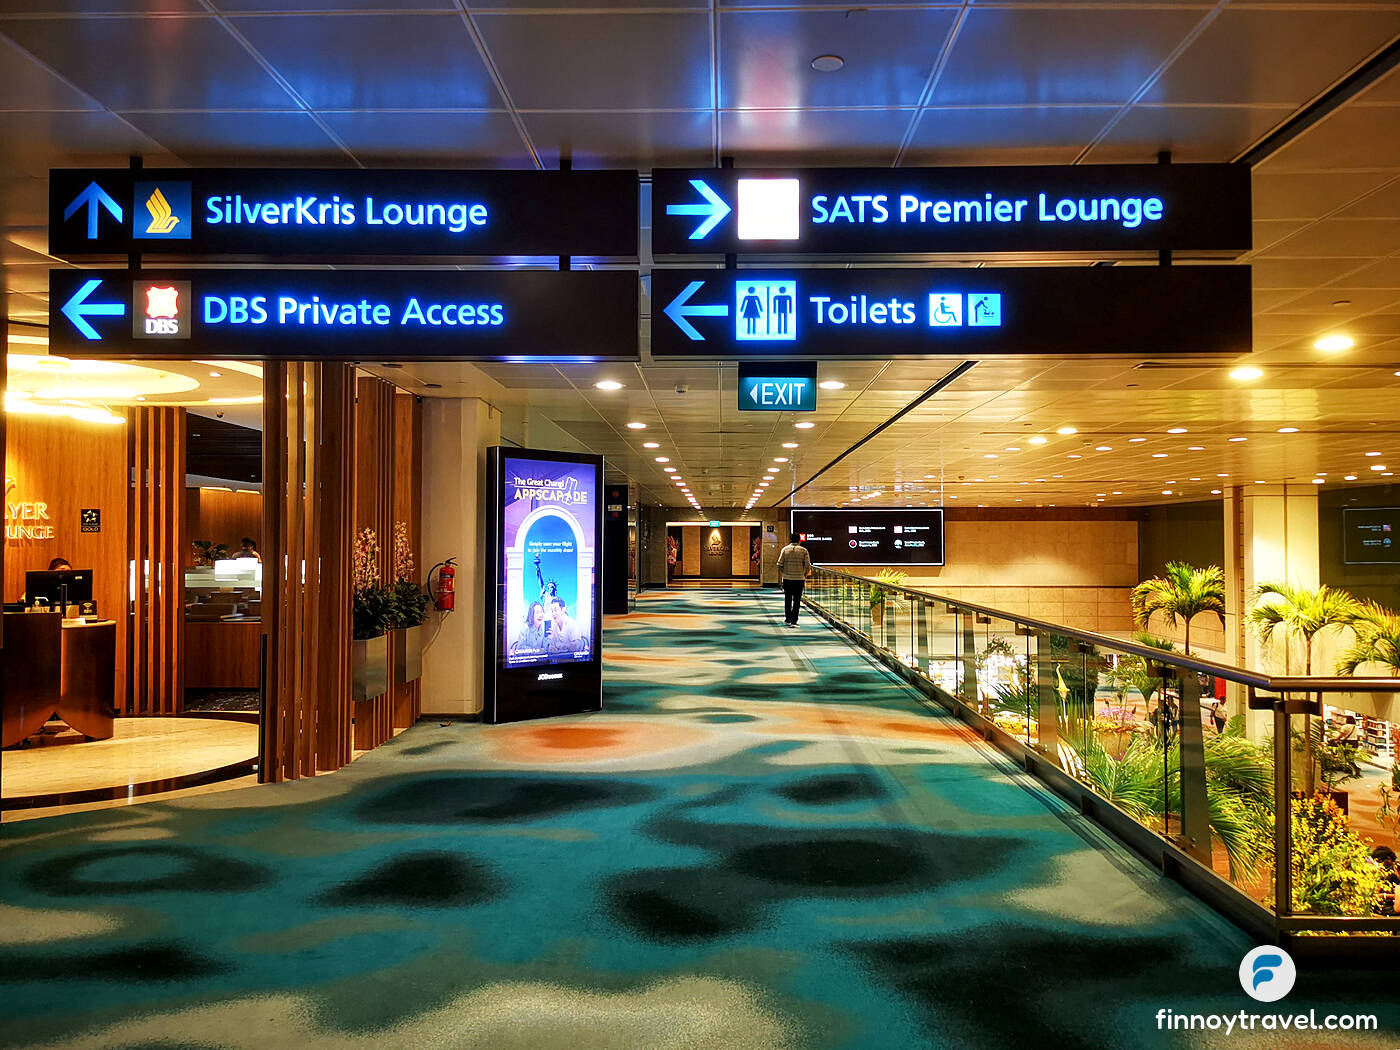 directional sign for SATS Premier Lounge